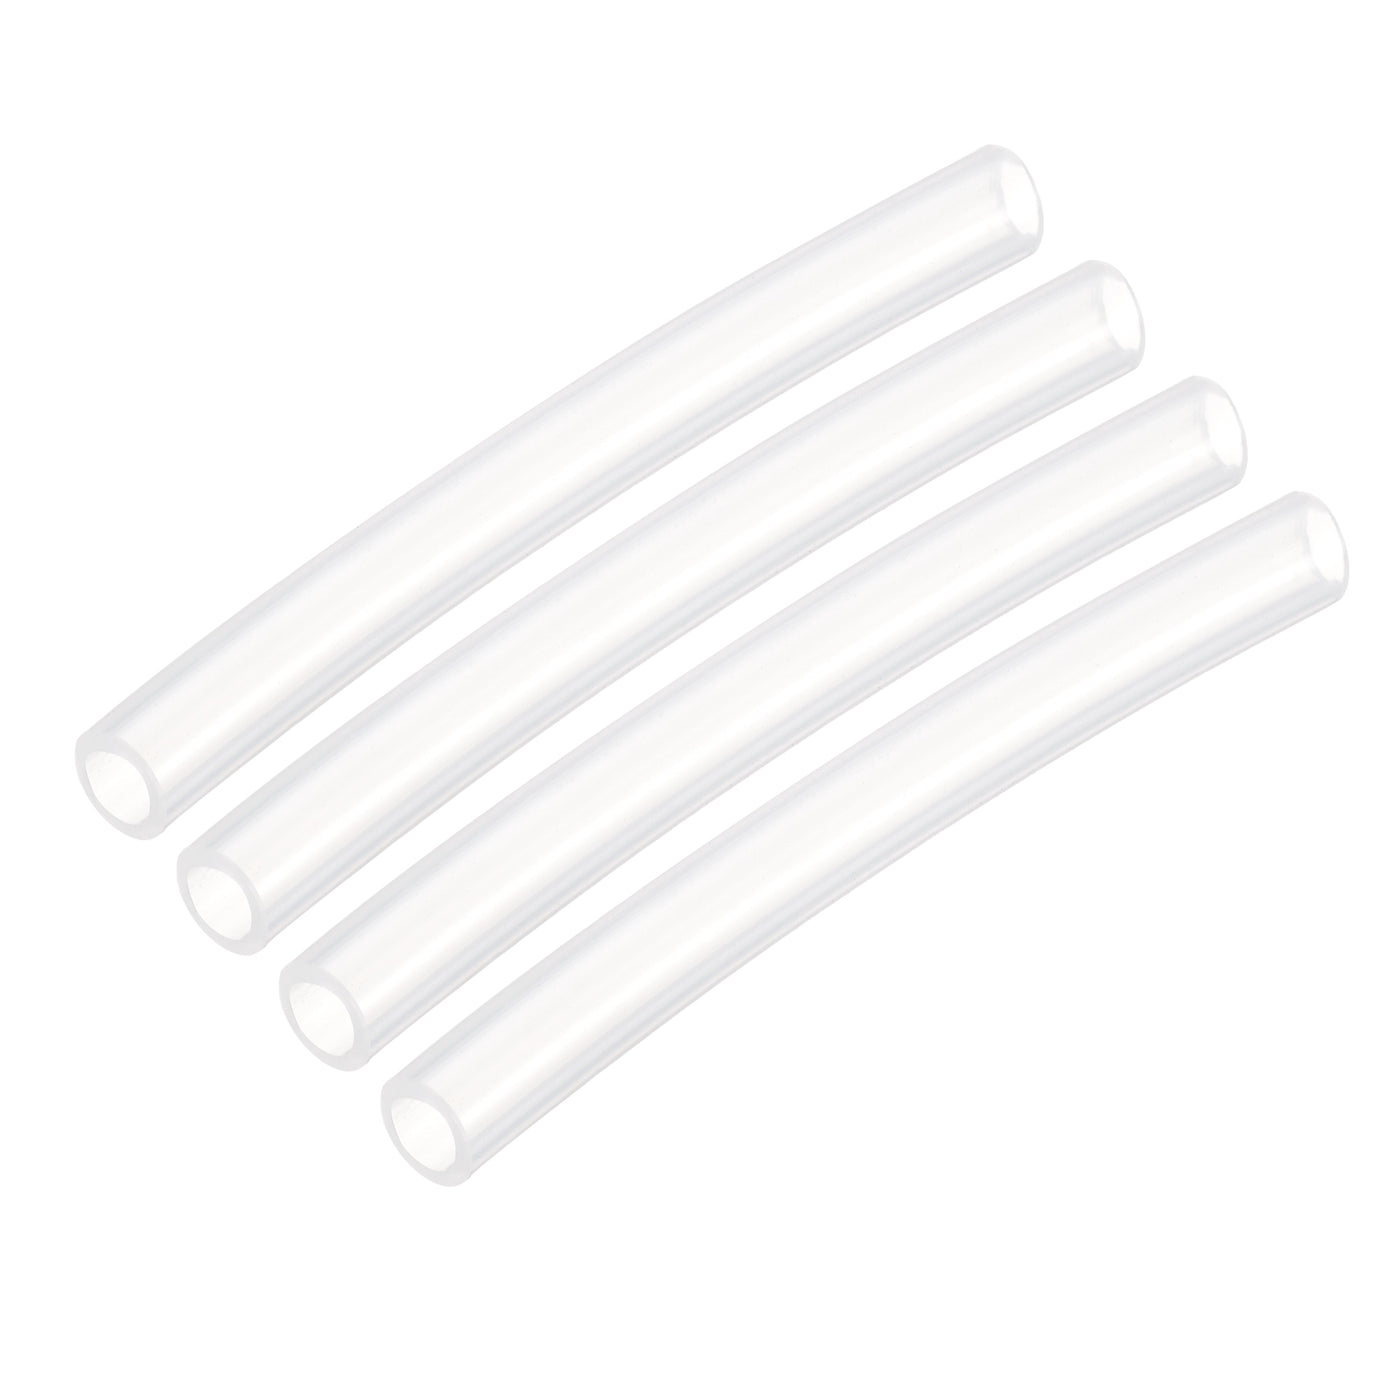 uxcell Uxcell Silicone Tubing 10mm ID,14mm OD 4Pcs 0.33 Ft for Pump Transfer, Transparent